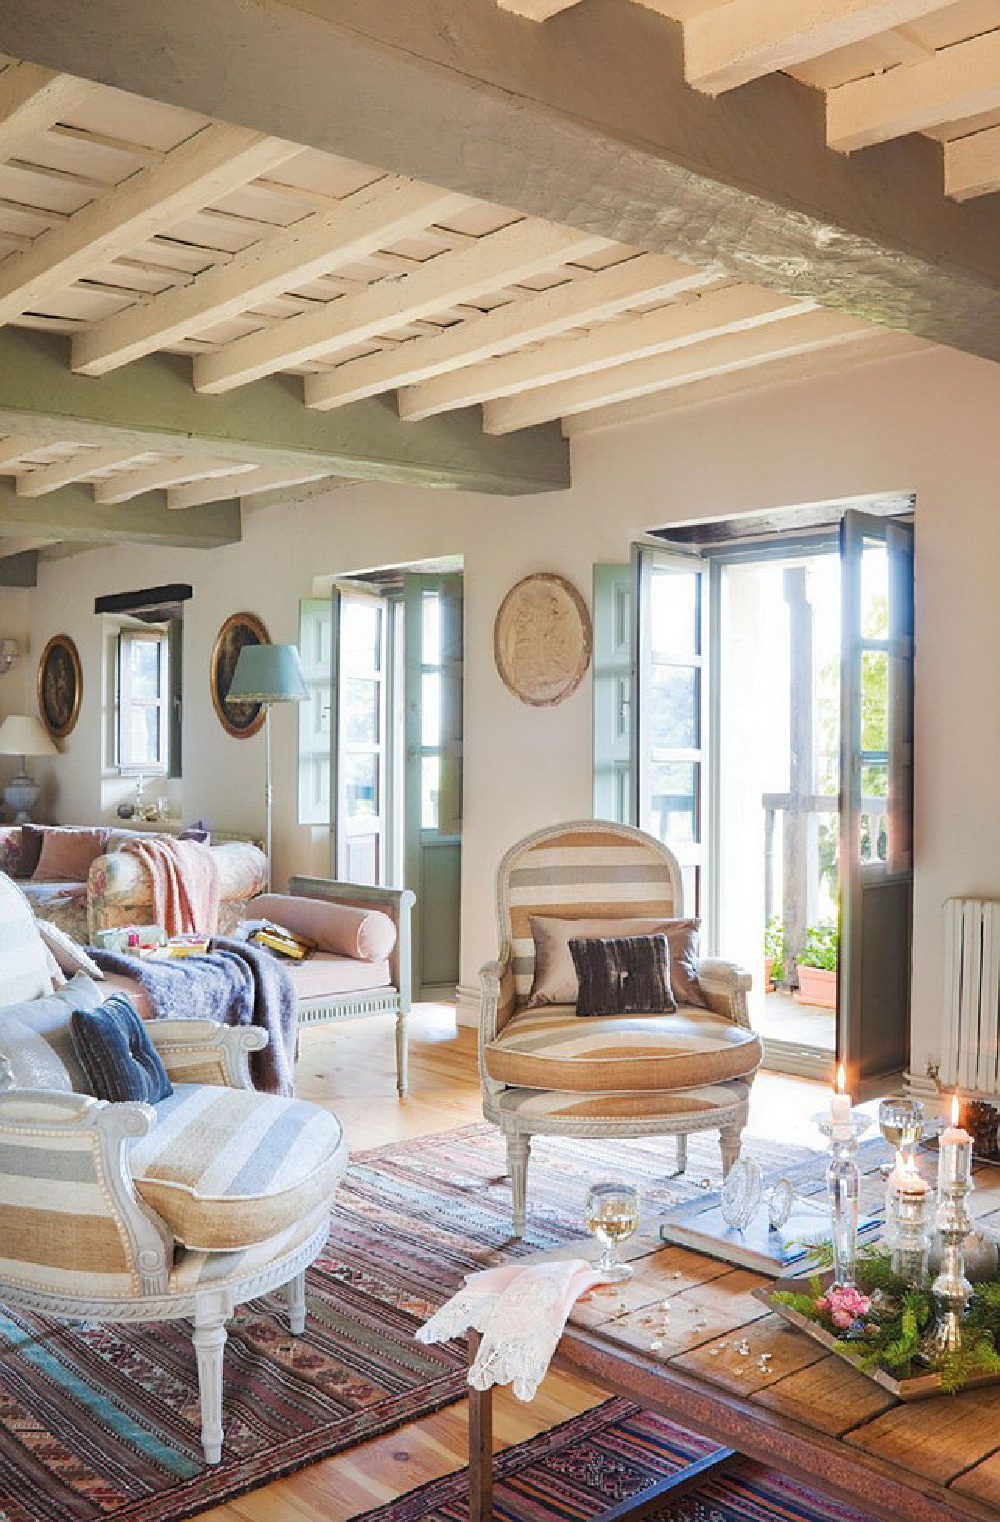 Charming old rustic cottage in Spain, with French country decor, light green, pink, and holiday decorations - El Mueble magazine. #frenchcountrychristmas #pinkchristmas #countryfrenchdecor #pinkandgreen